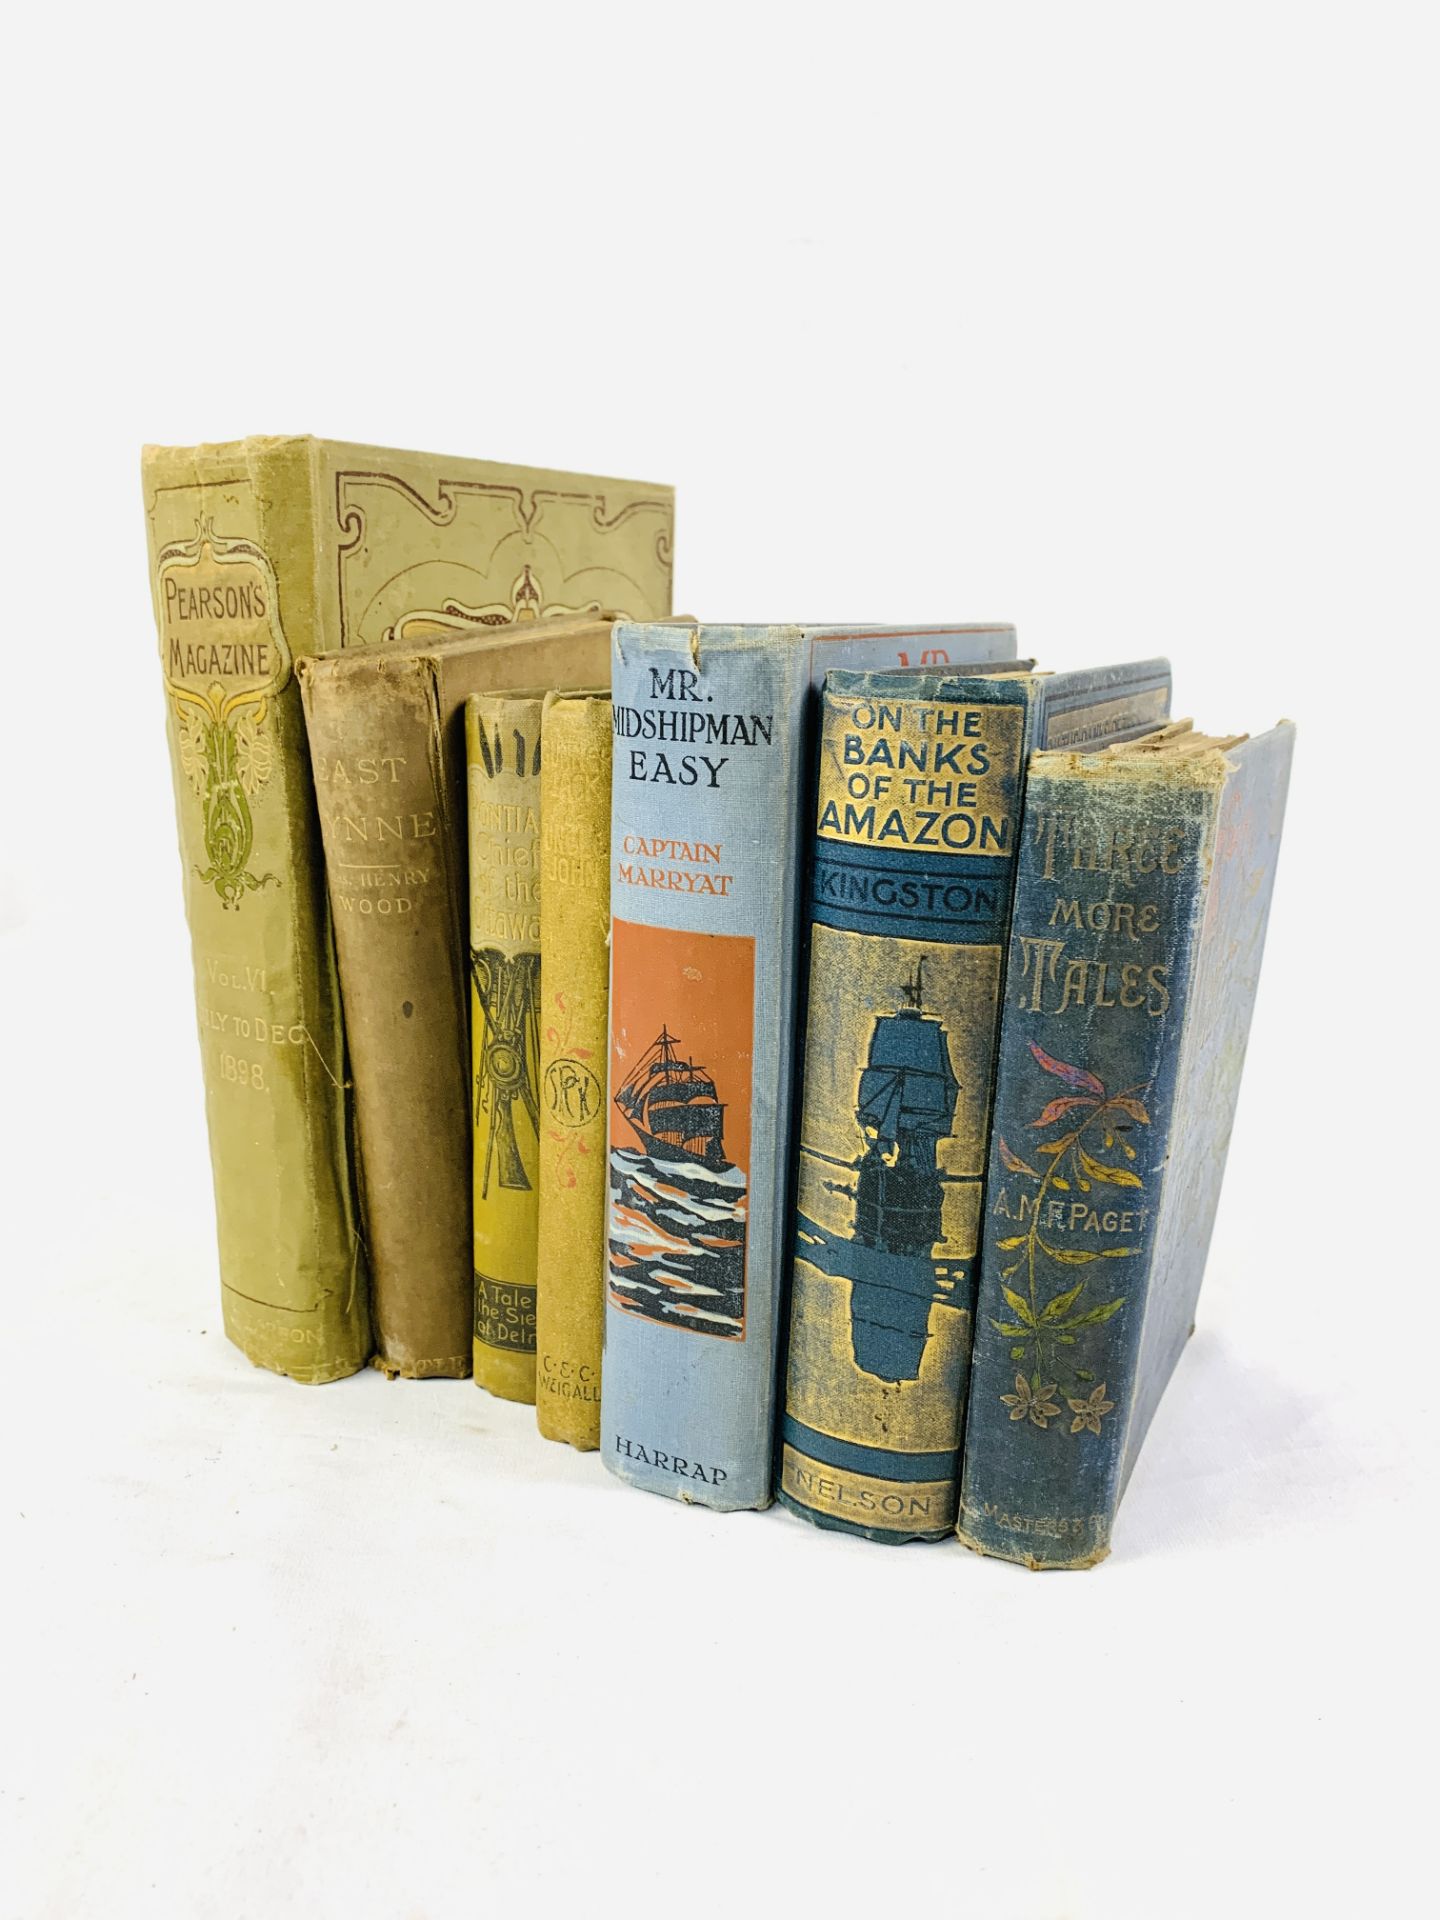 Seven early 20th century hard back novels, and a copy of Pearson's Magazine, 1898.